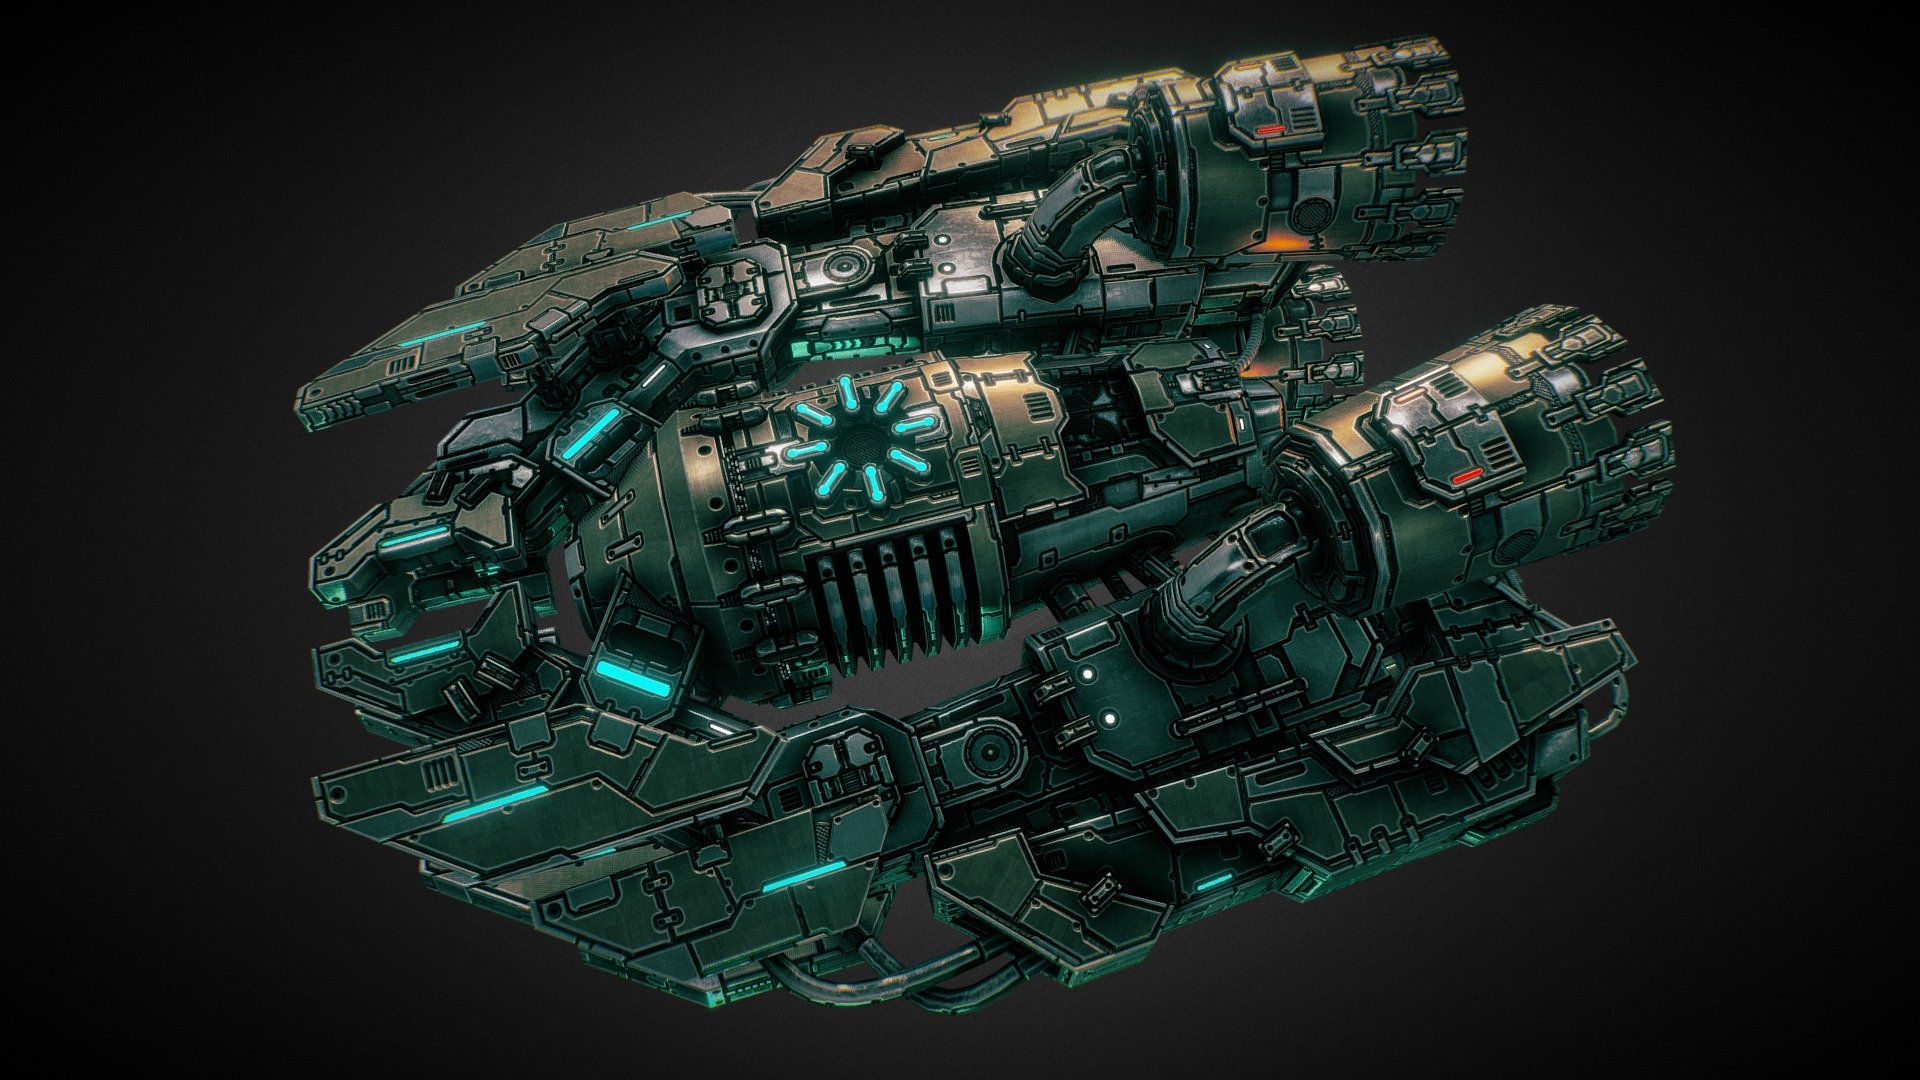 In-game model of a medium spaceship belonging to the Deprived faction.
Learn more about the game at http://starfalltactics.com/ - Starfall Tactics — Kolgrim Deprived battleship - 3D model by Snowforged Entertainment (@snowforged) 3d model